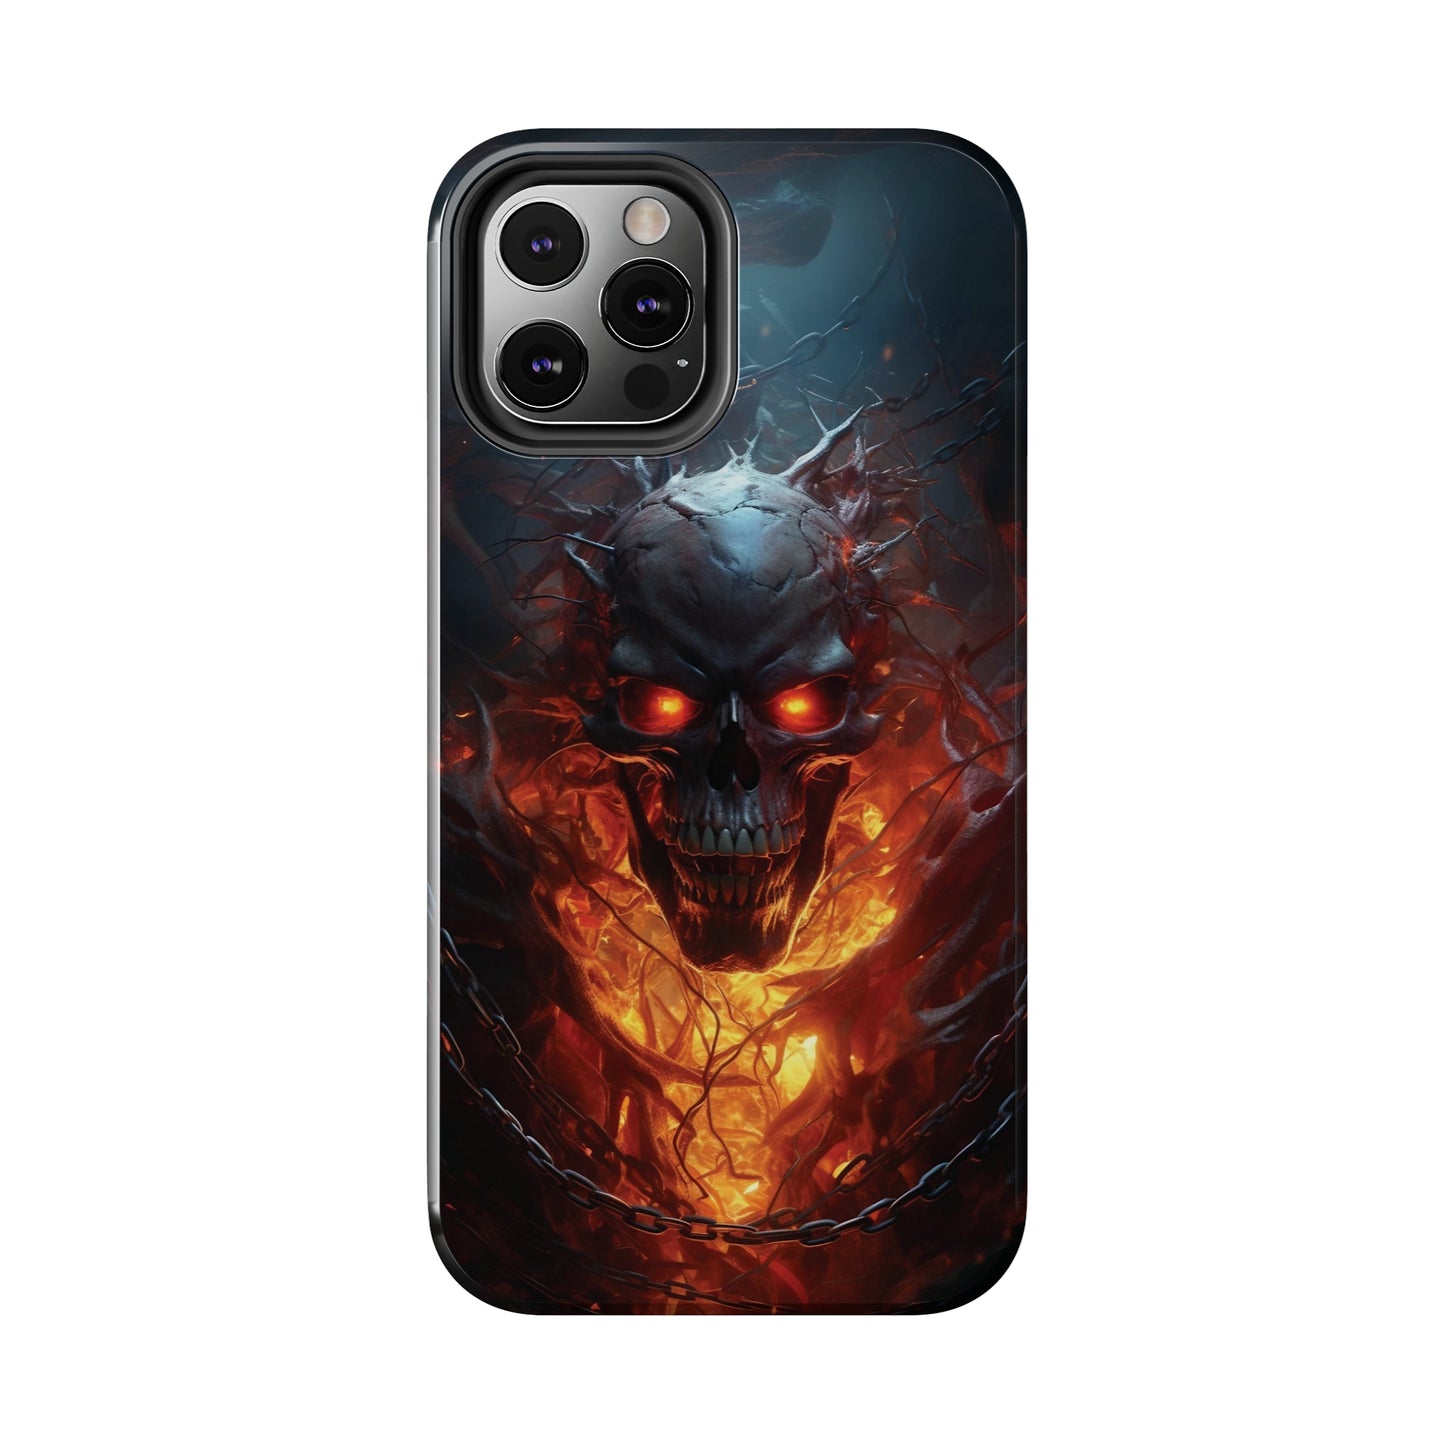 Fiery Skull iPhone Case, Flame Gothic Art Phone Cover, Unique Horror Style iPhone Accessory, Cool Tech Design for iPhone Models, Durable Phone Accessory Protective Cover for iPhone Models, Tough iPhone Case